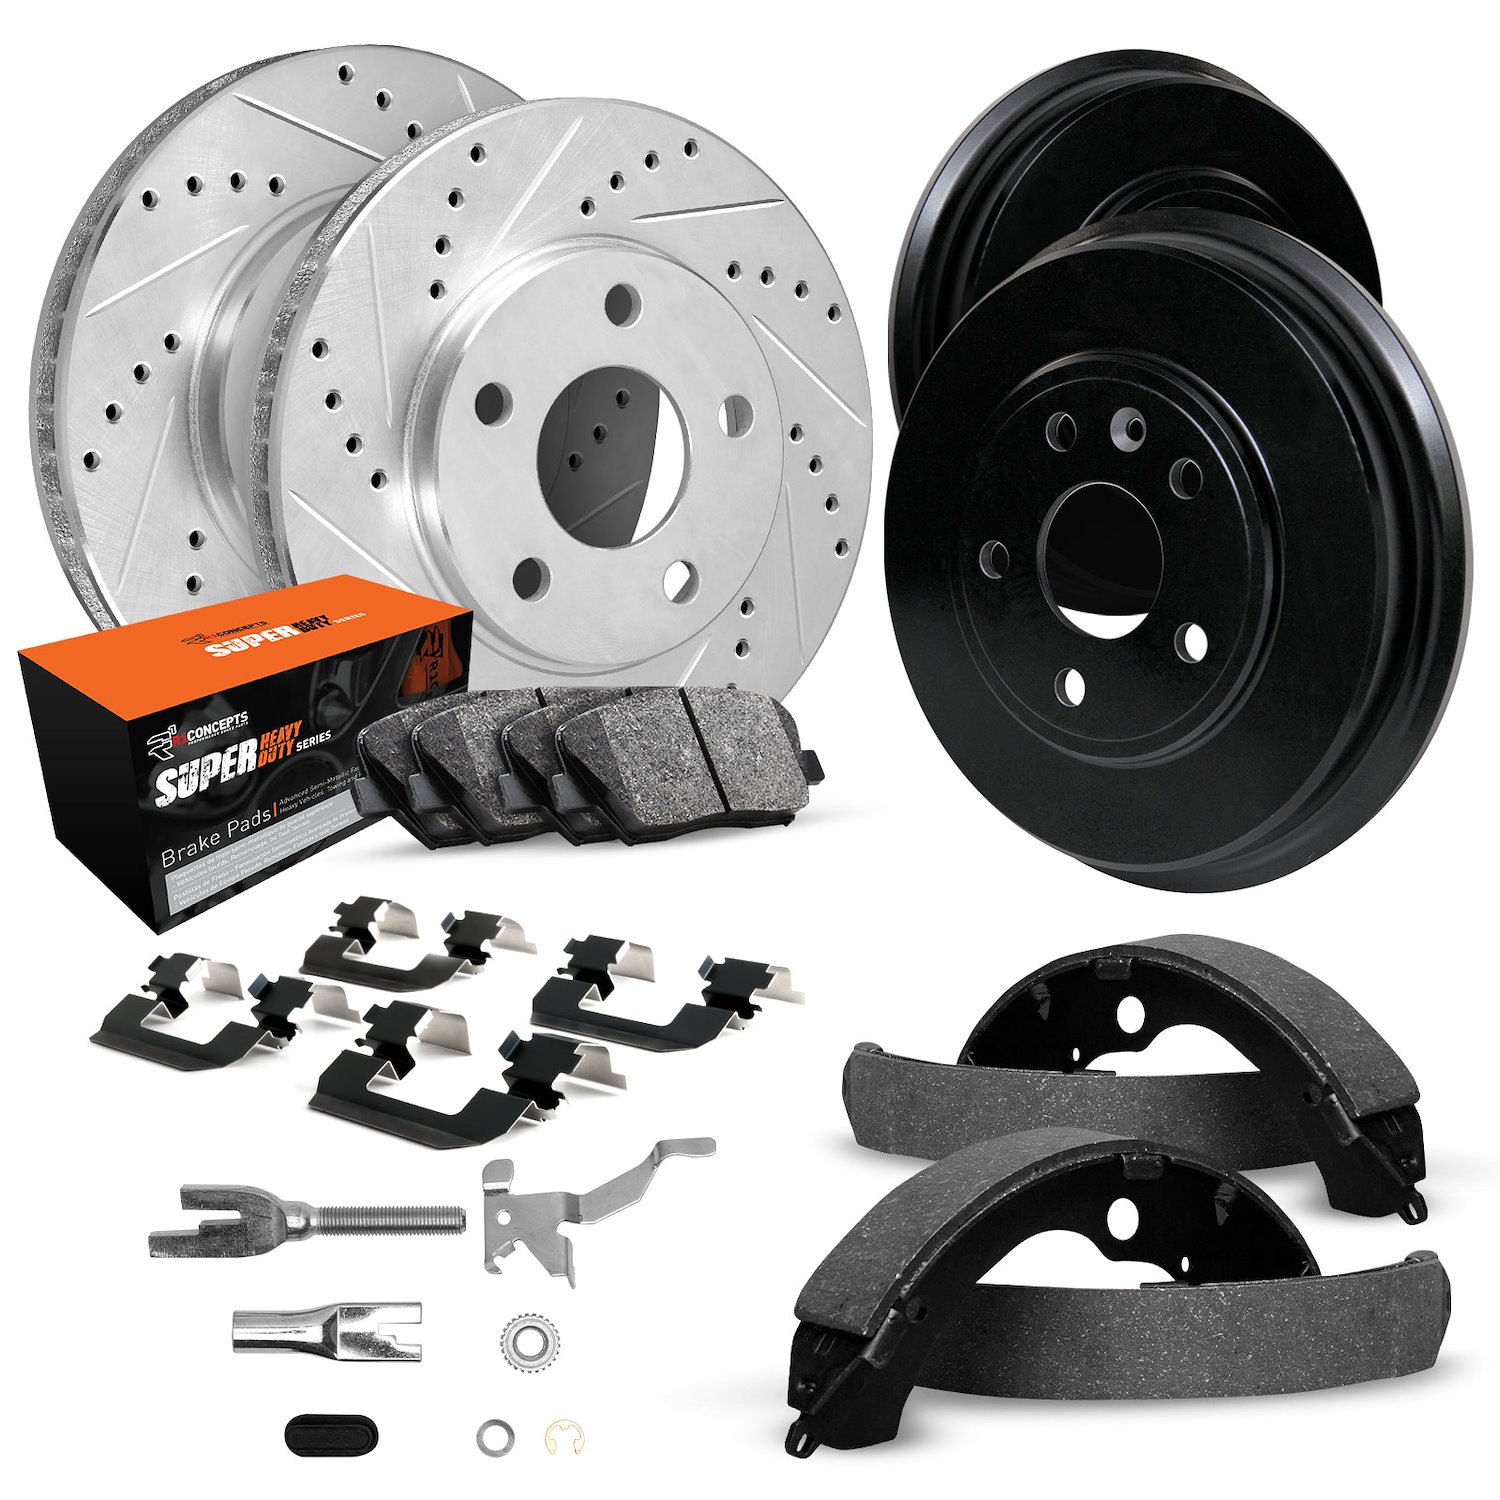 E-Line Drilled/Slotted Silver Rotor & Drum Set w/Super-Duty Pads, Shoes/Hardware/Adjusters, 1995-1997 Ford/Lincoln/Mercury/Mazda